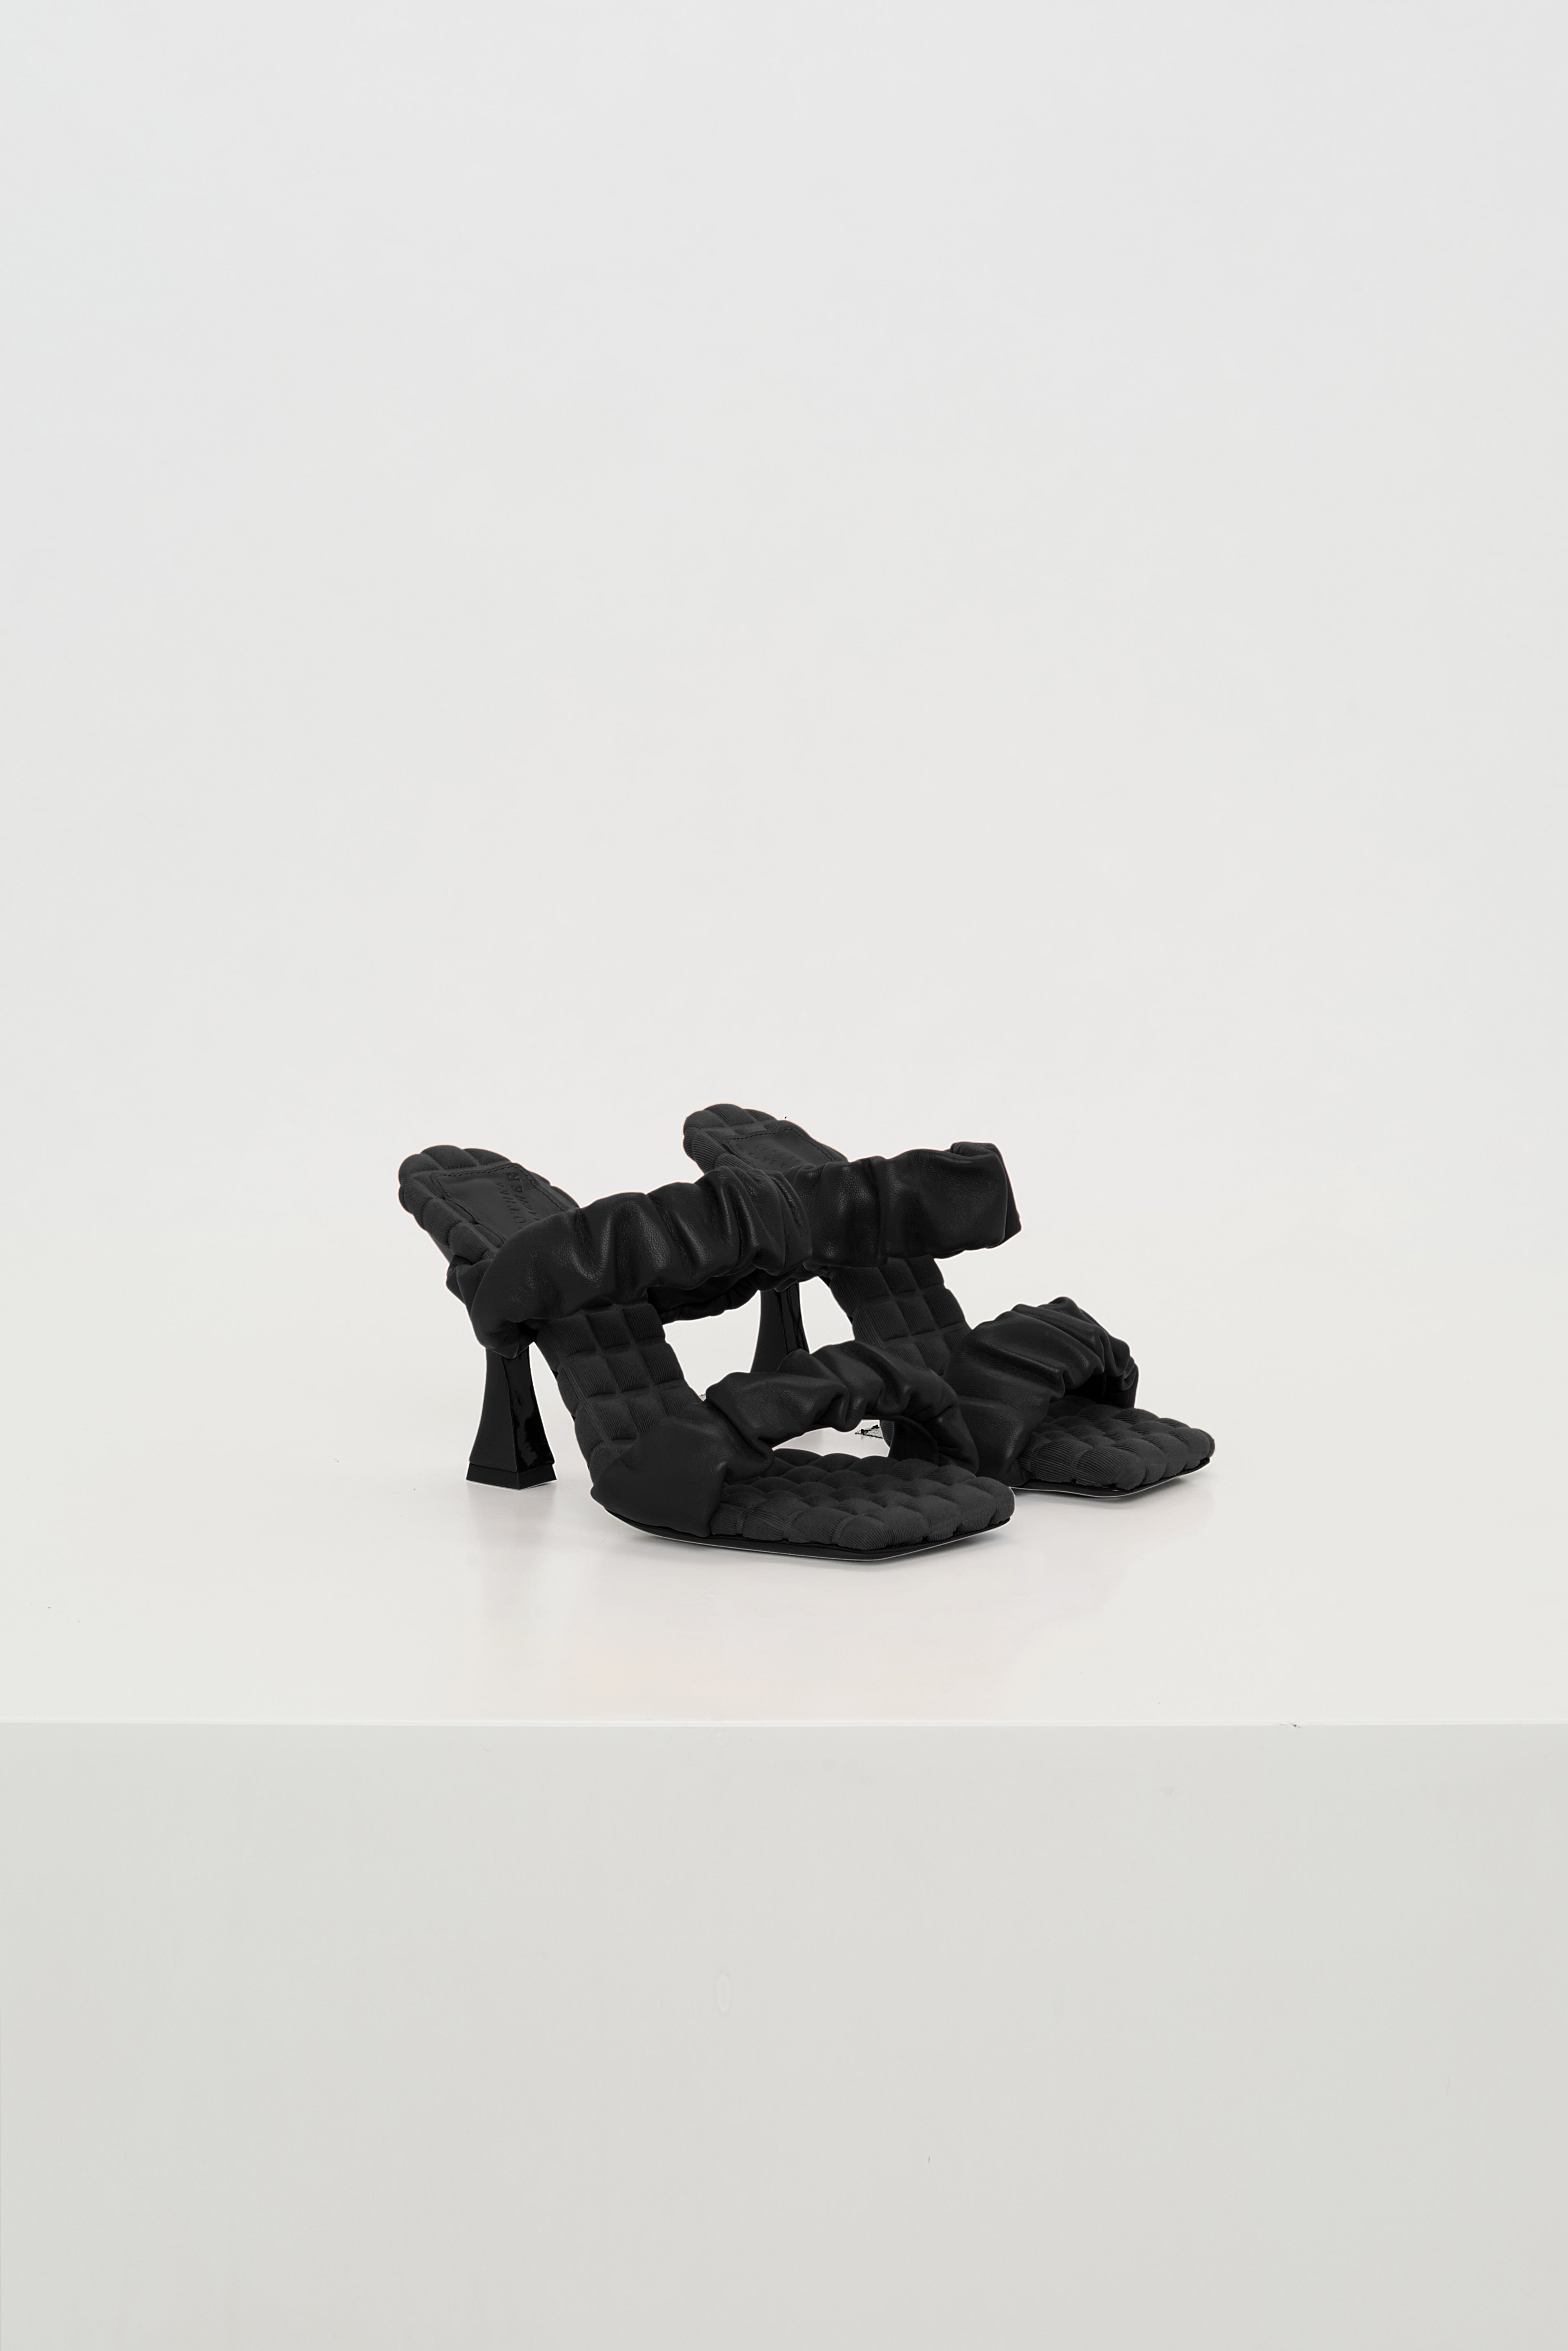 Dorothee-Schumacher-OUTLET-SALE-SPORTY-FEMININITY-sandal-heeled-Sandalen-ARCHIVE-COLLECTION_f6a165a1-3cfd-4095-ae08-ced055c49baa.jpg